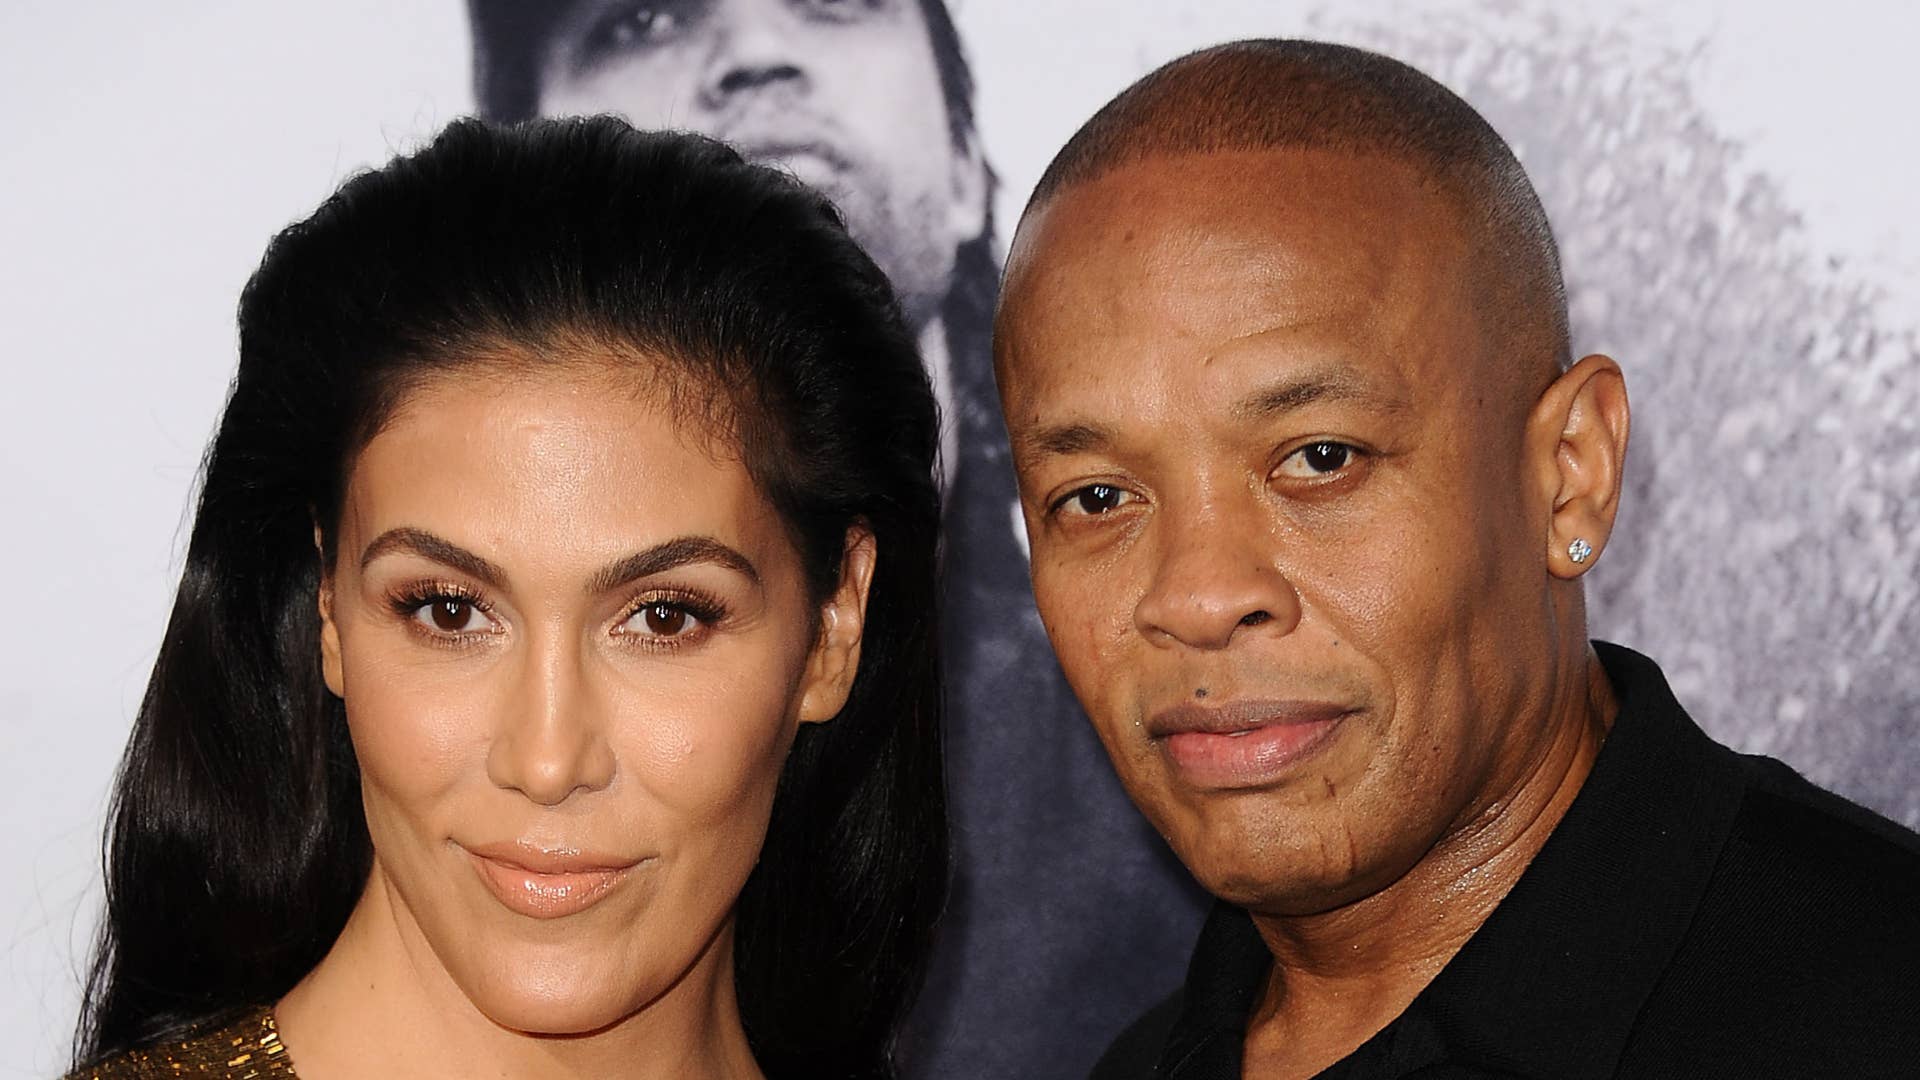 Dr. Dre and wife Nicole Young attend the premiere of "Straight Outta Compton."